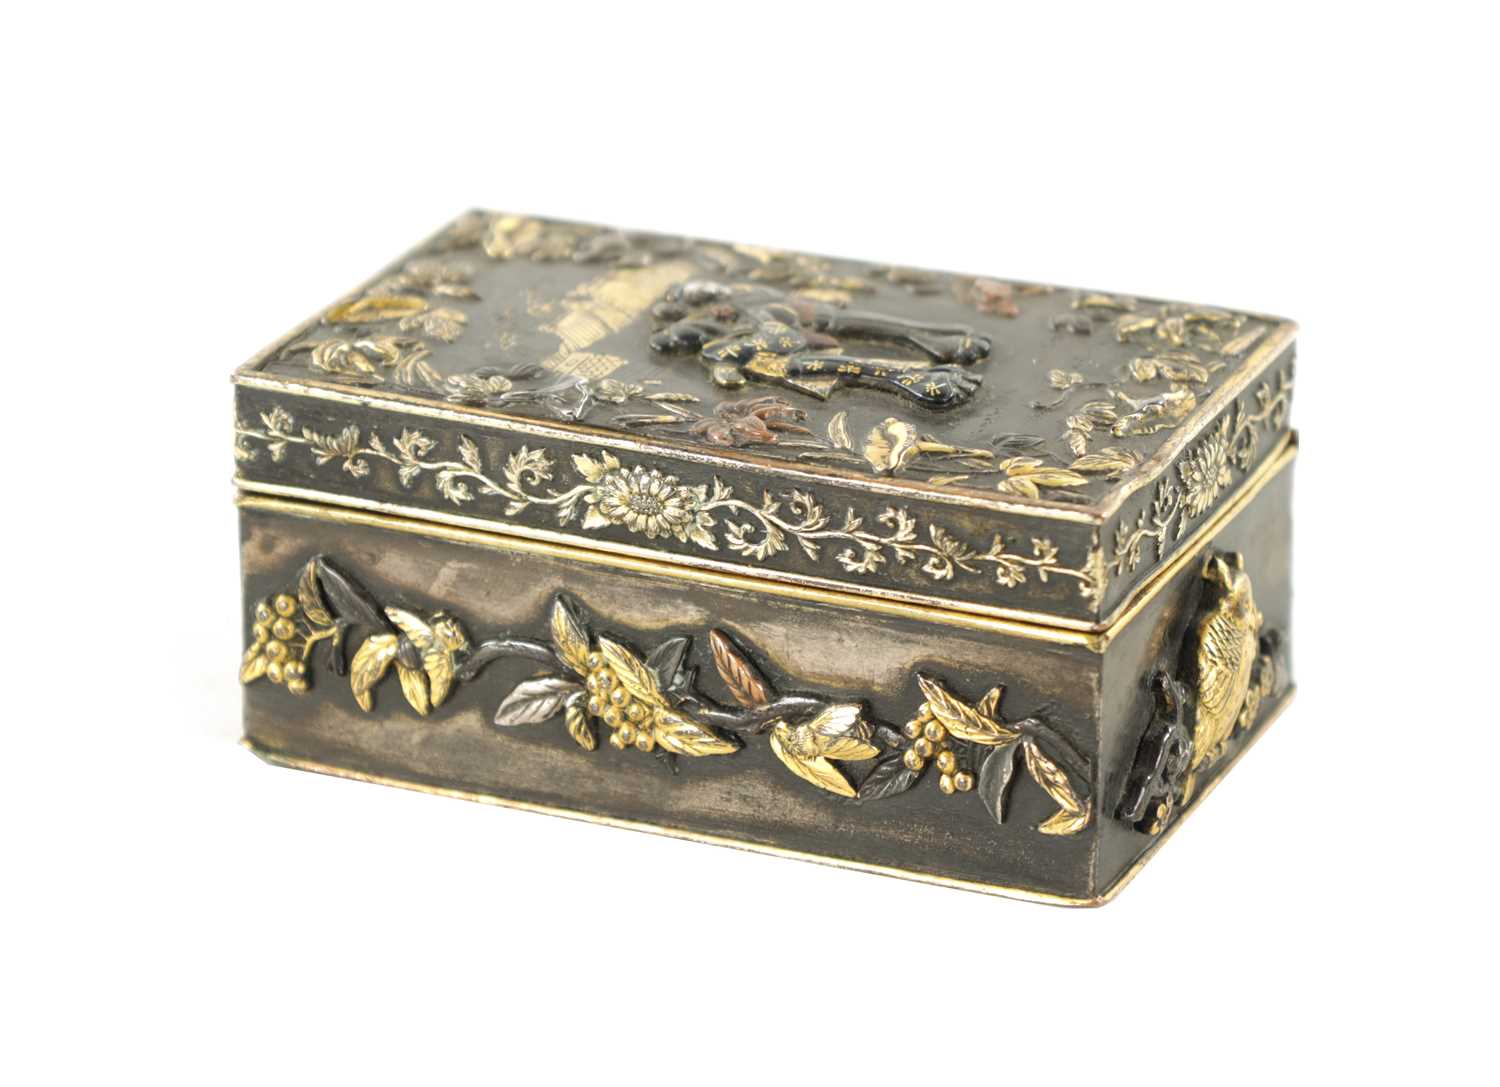 A SMALL JAPANESE MEIJI PERIOD GOLD INLAID MIXED METAL BRONZE BOX